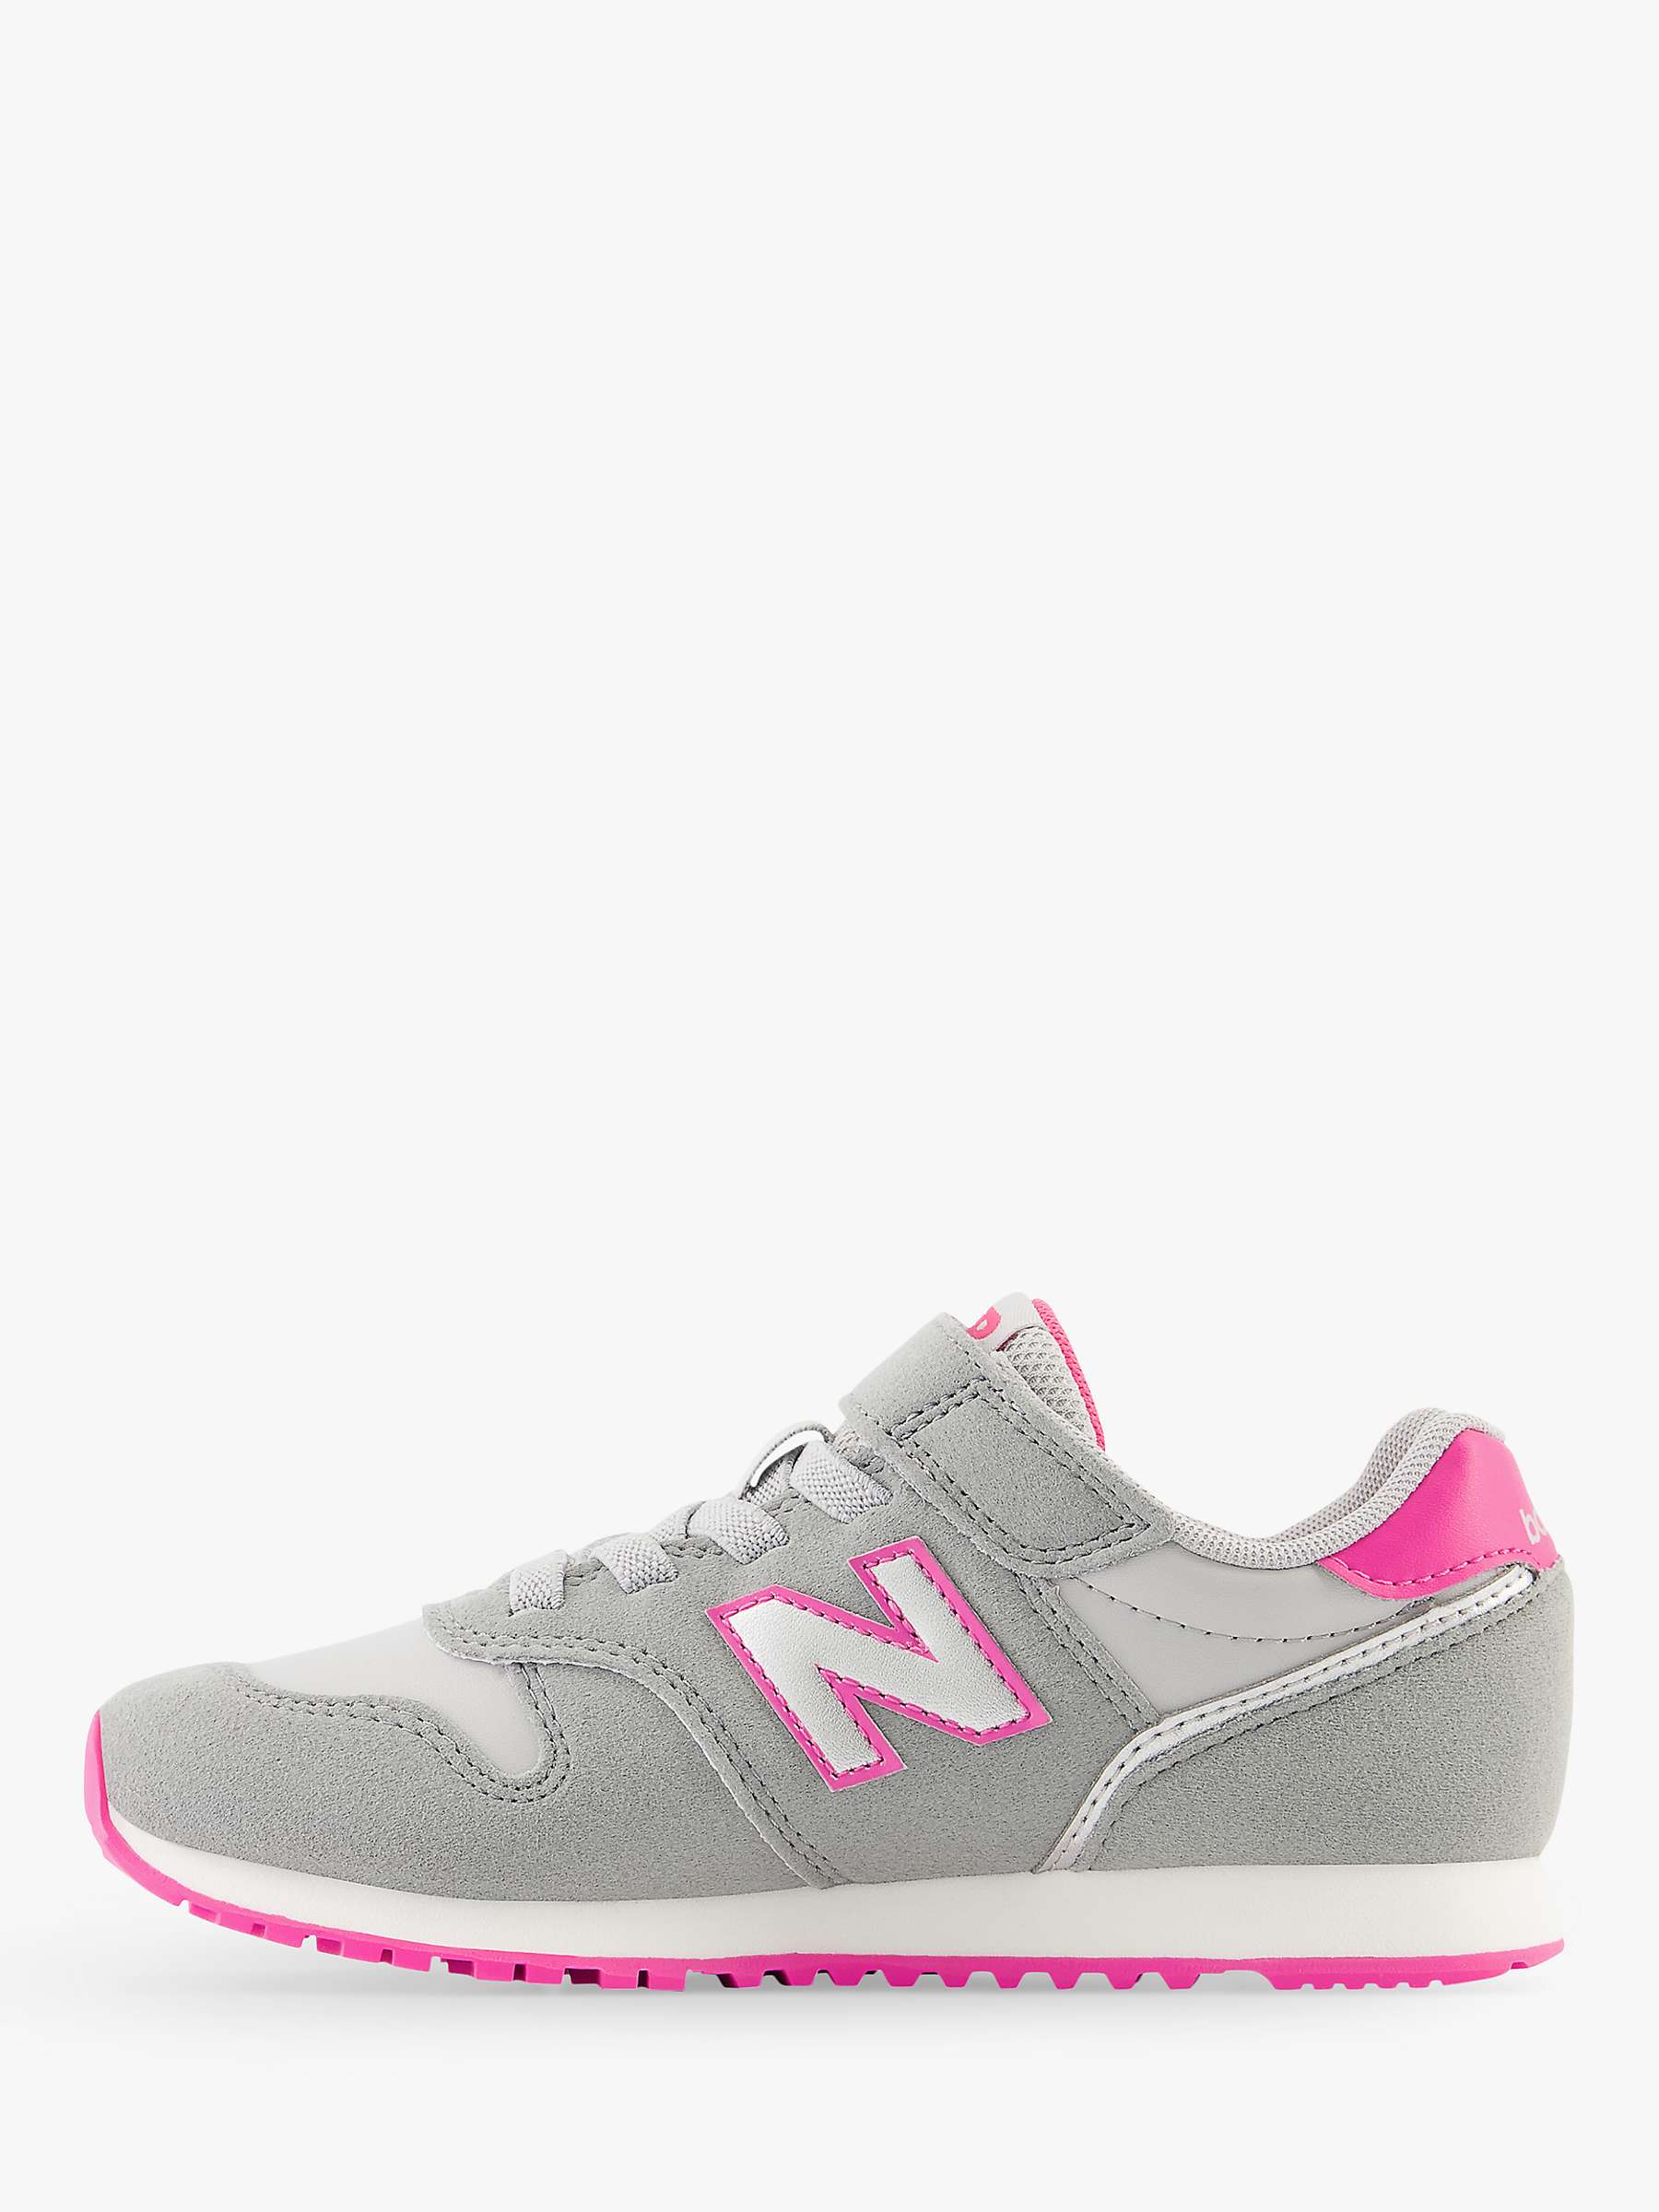 Buy New Balance Kids' 373 Bungee Lace with Velcro Top Strap Trainers Online at johnlewis.com